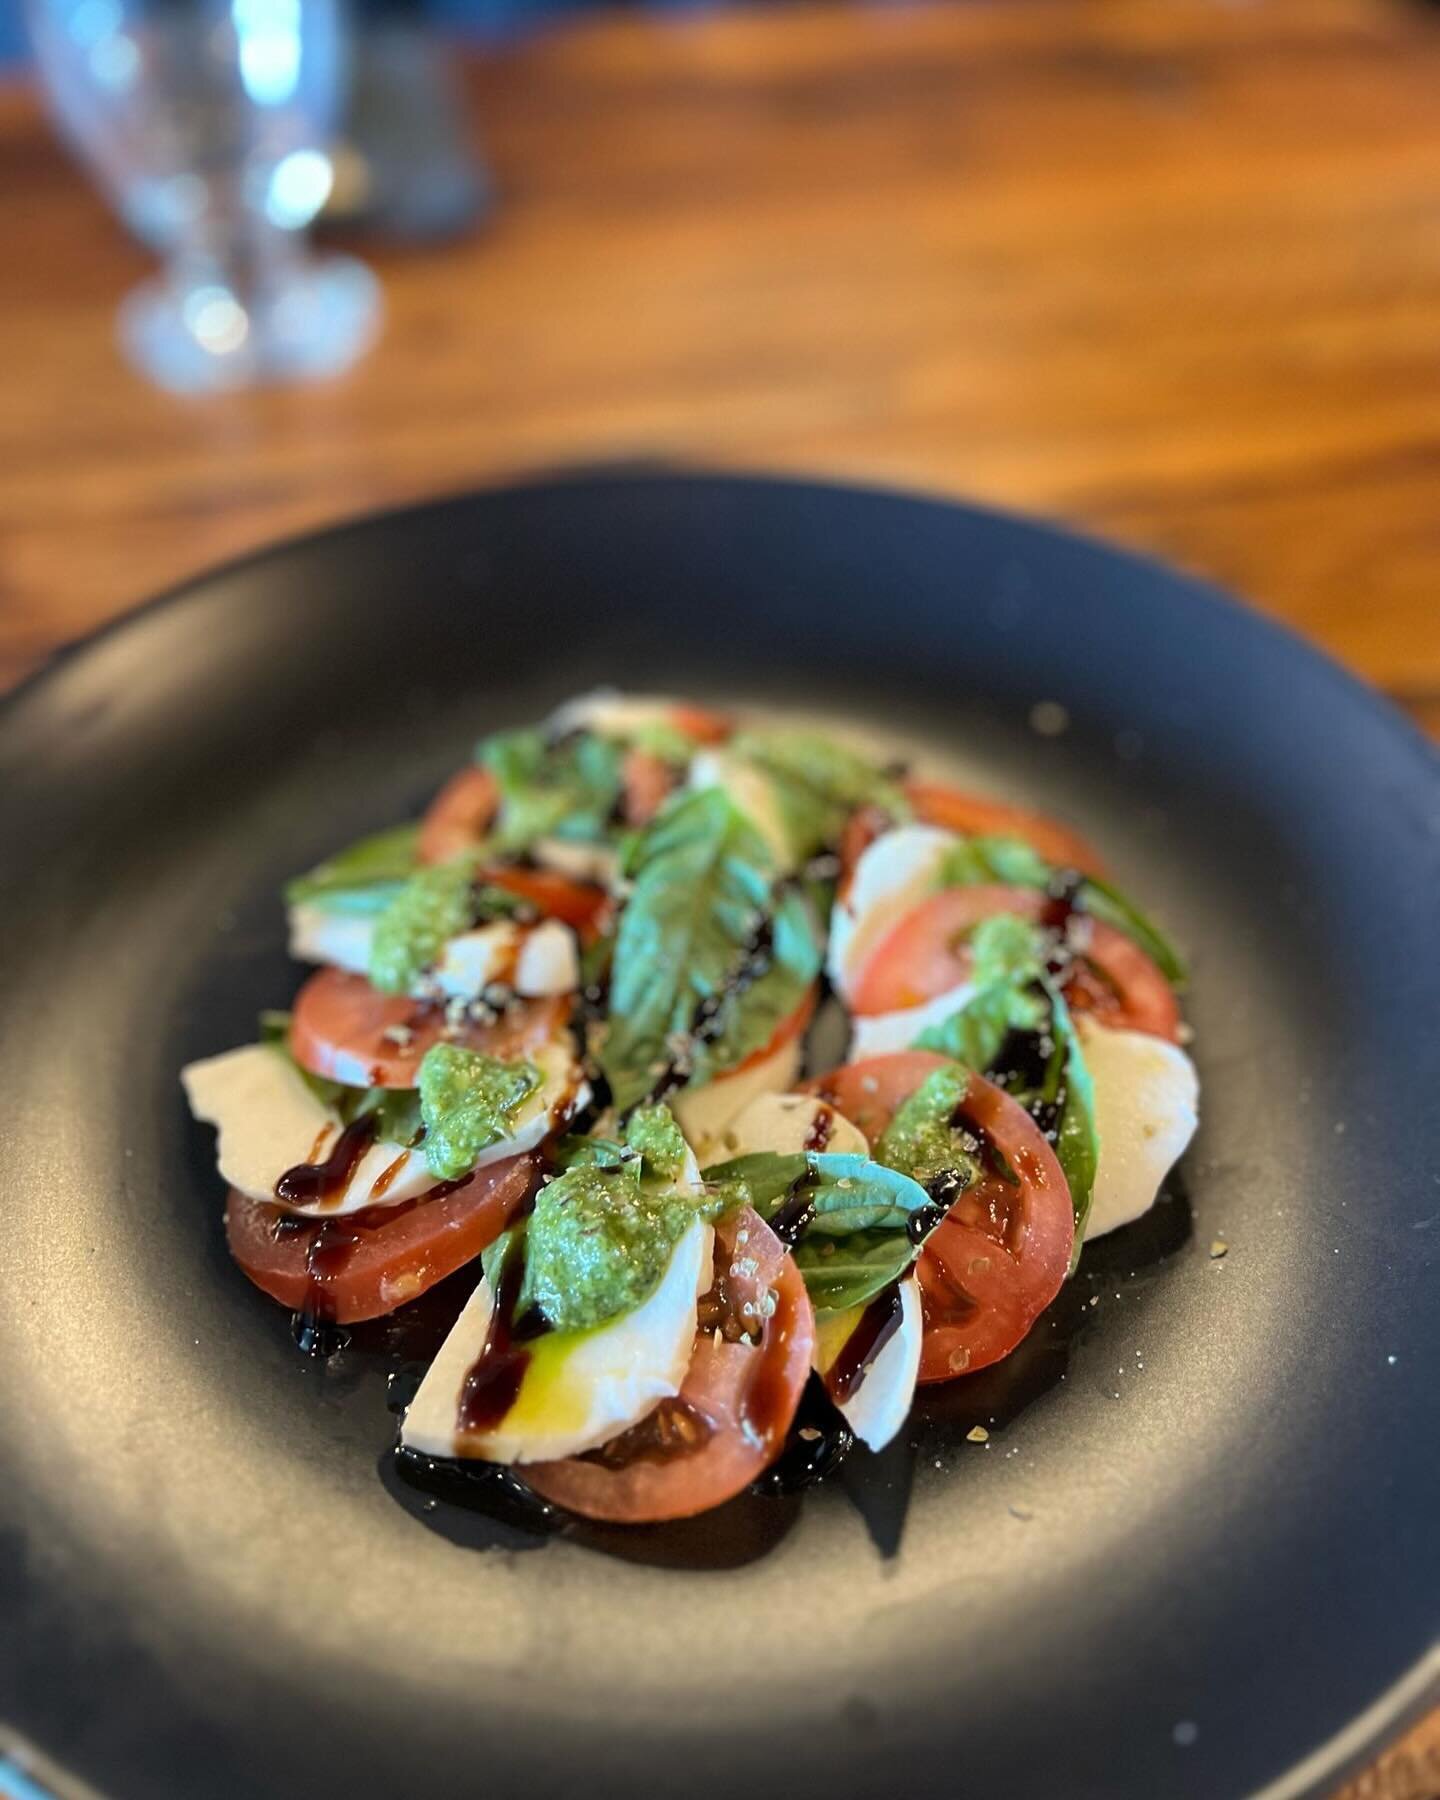 Experience the perfection of our exquisite caprese salad paired with a fine glass of wine.🍷🥗. #corkitkaty #winelover #winetasting